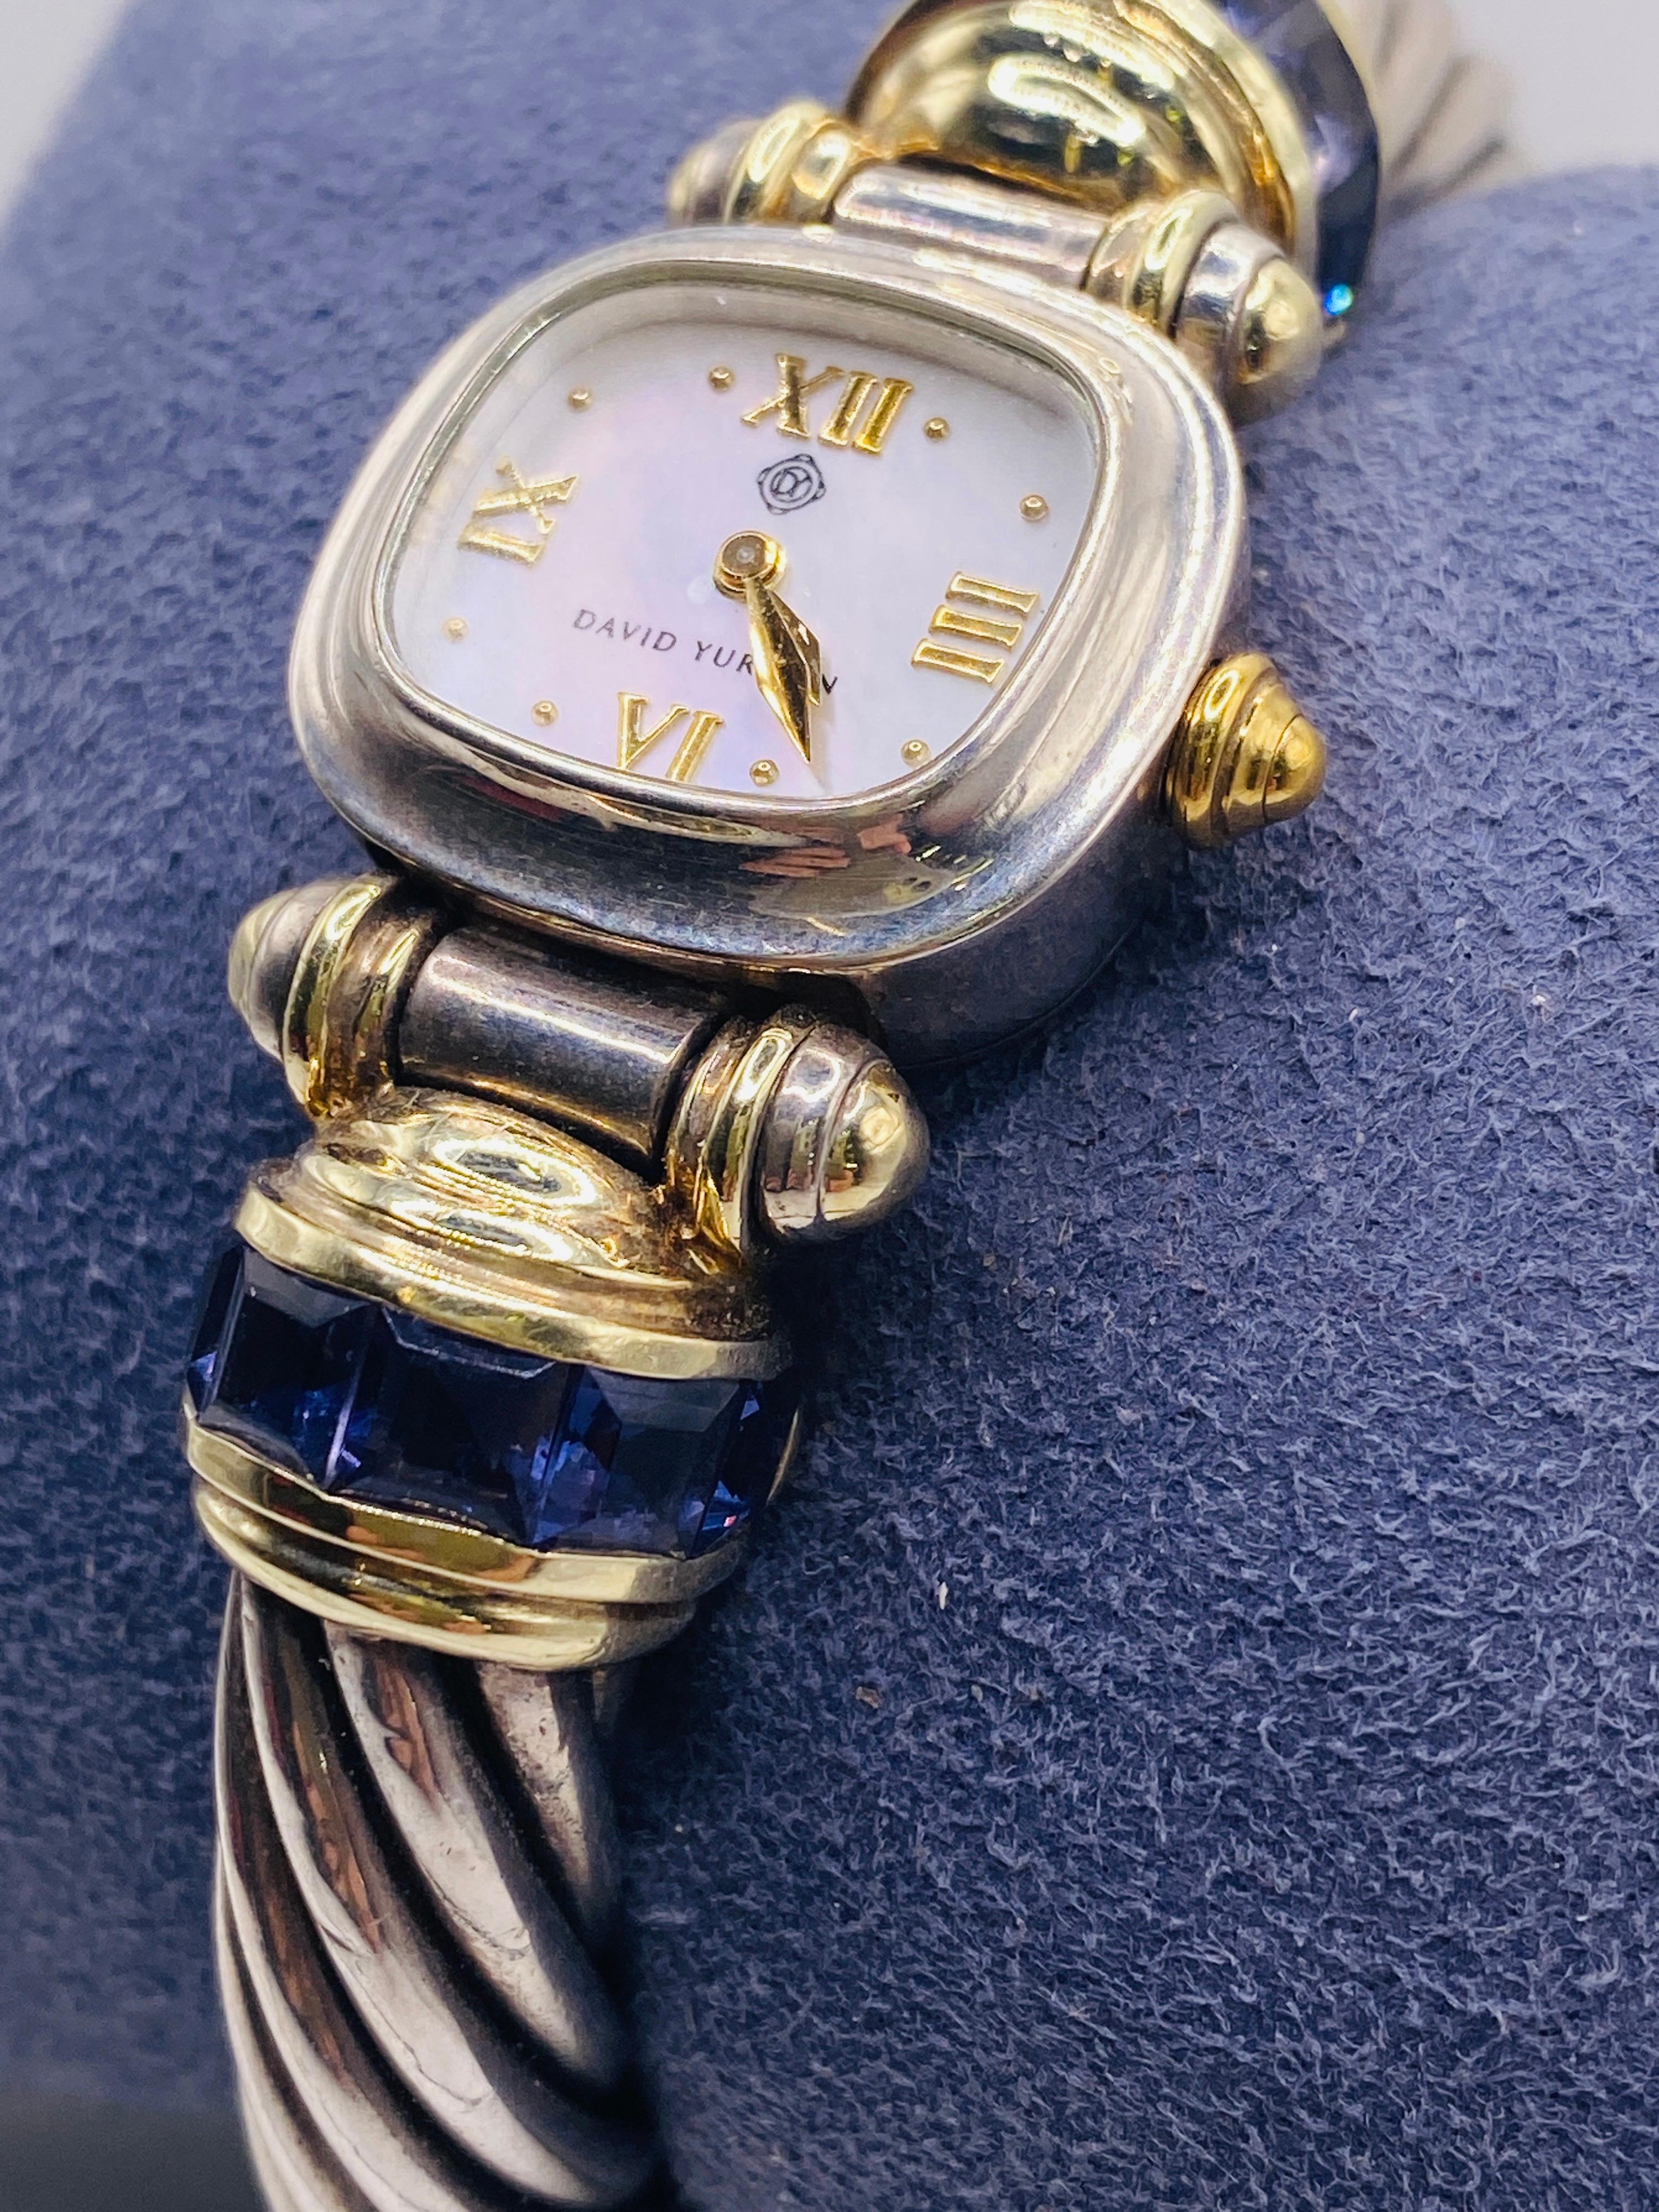 David Yurman cable cuff watch with 14k yellow gold, sterling silver and blue tanzanite stones. Item T-29004